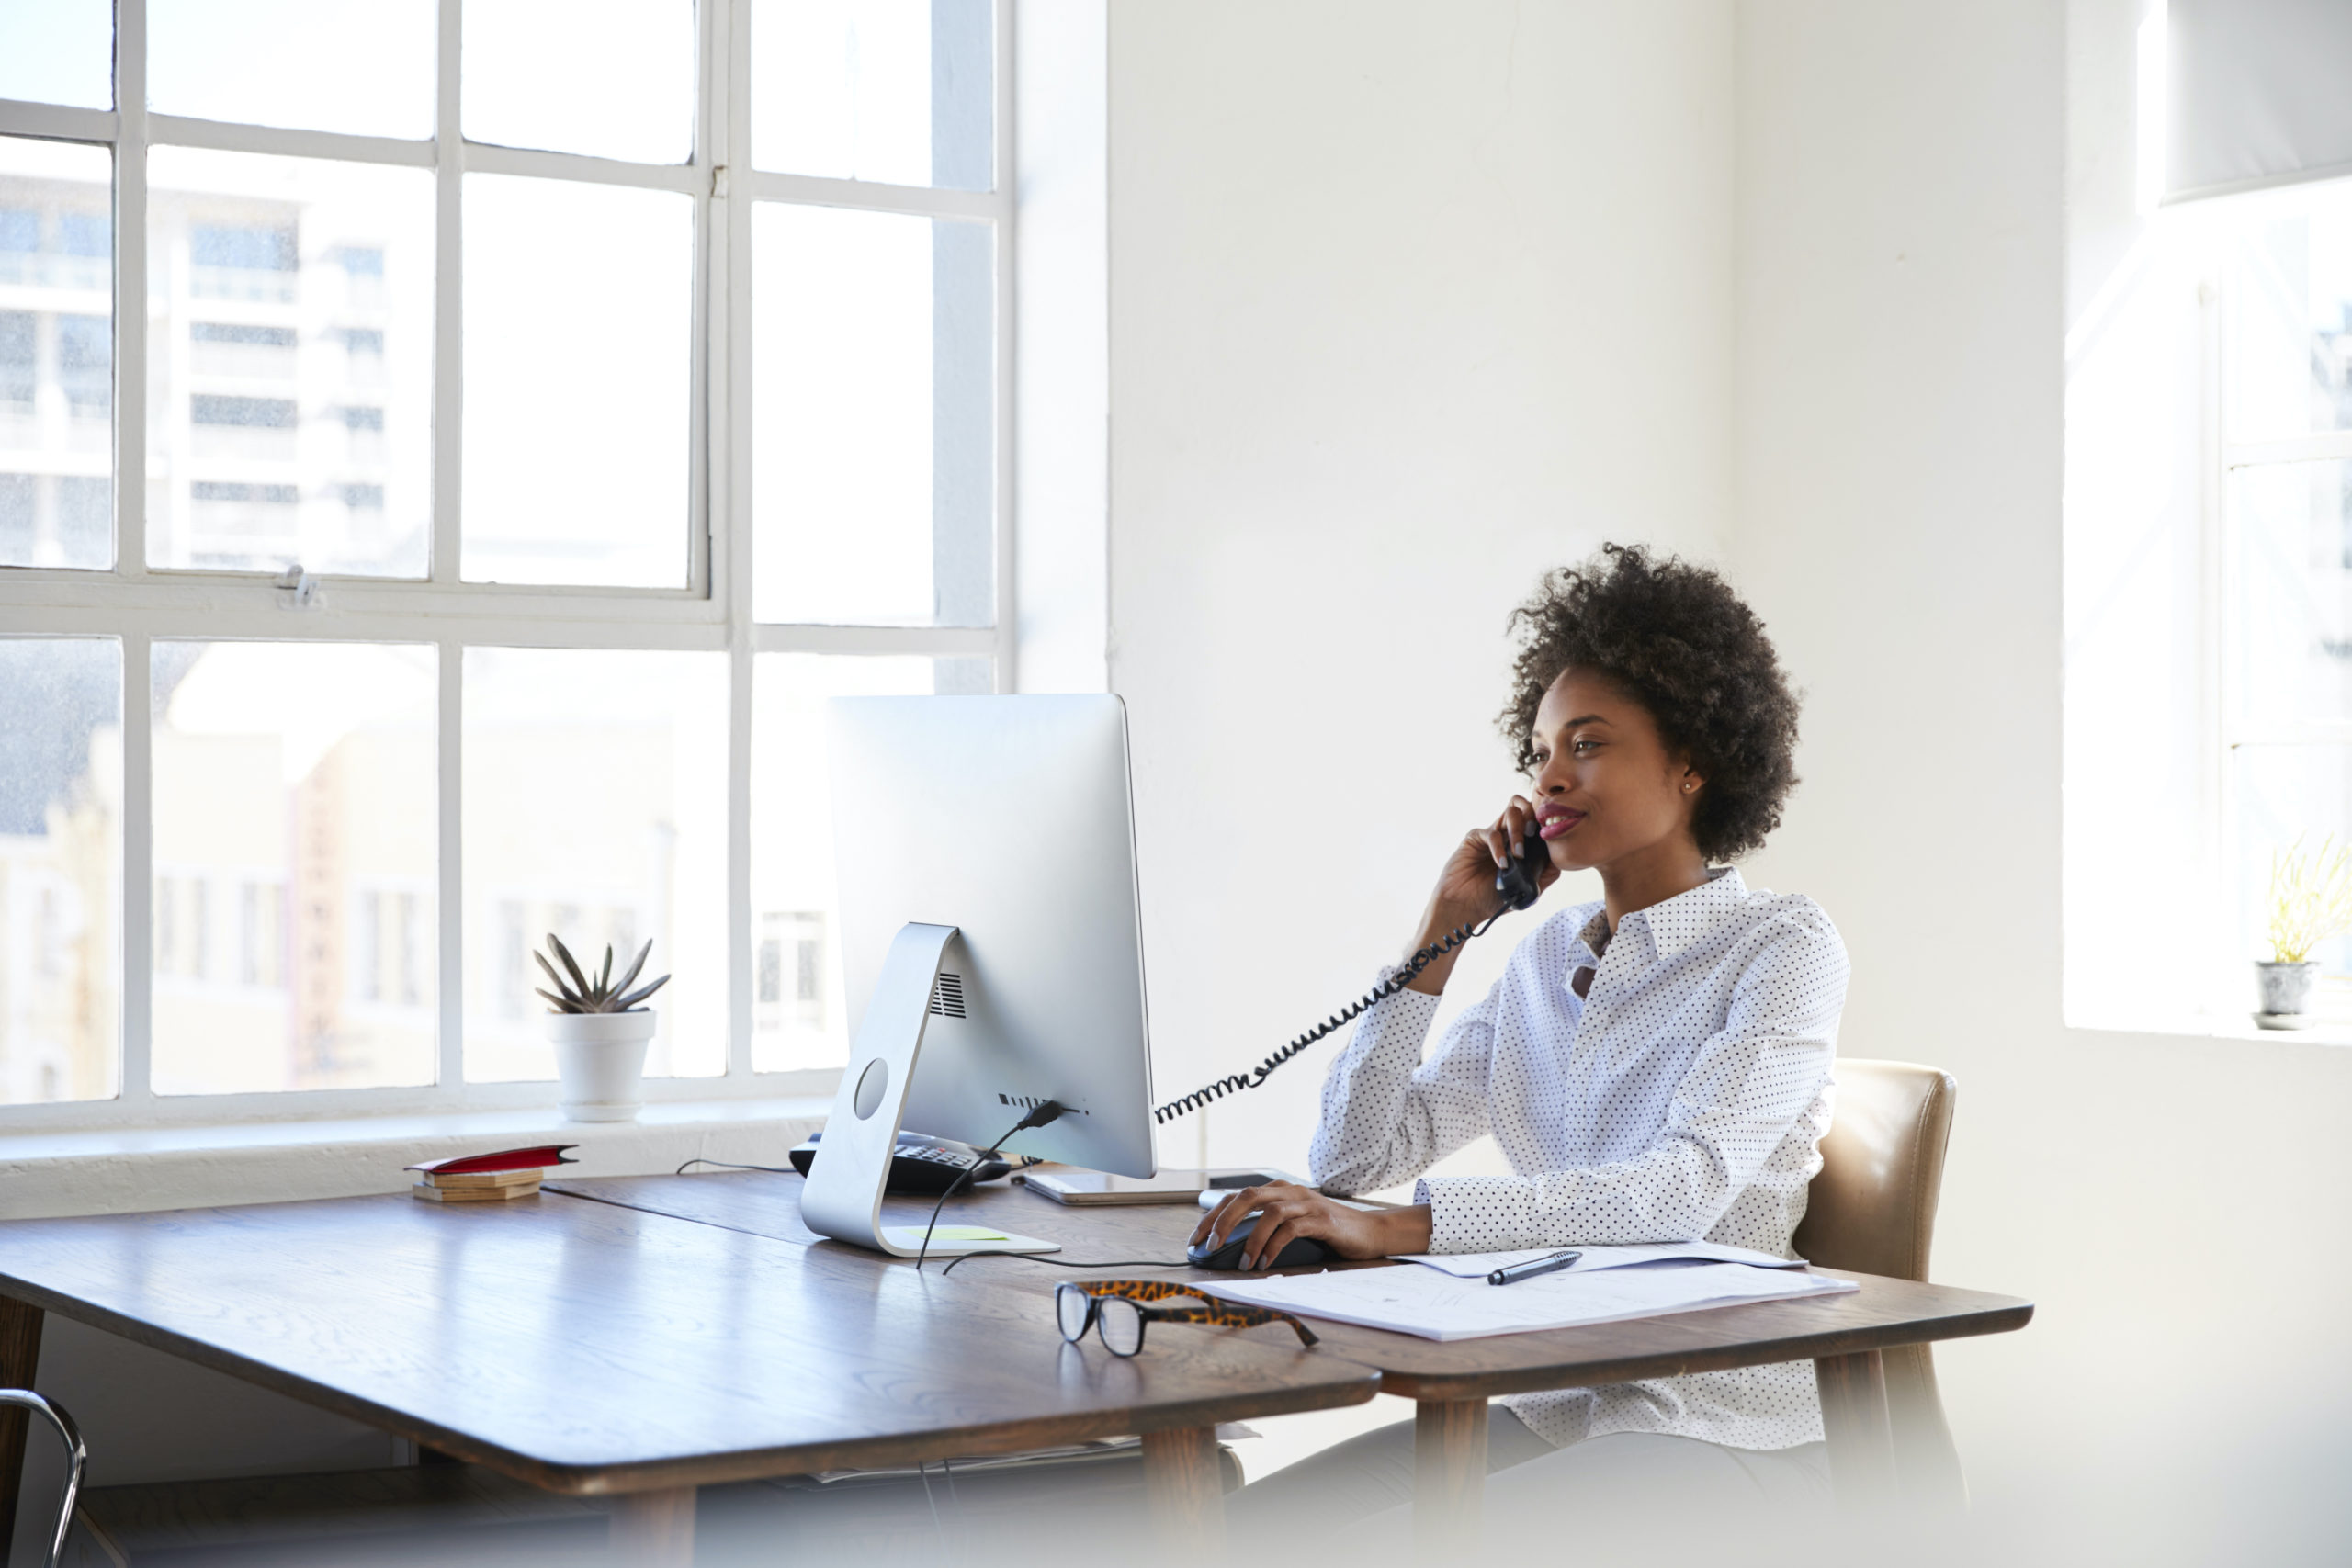 Young black woman talking on phone at her desk in an office